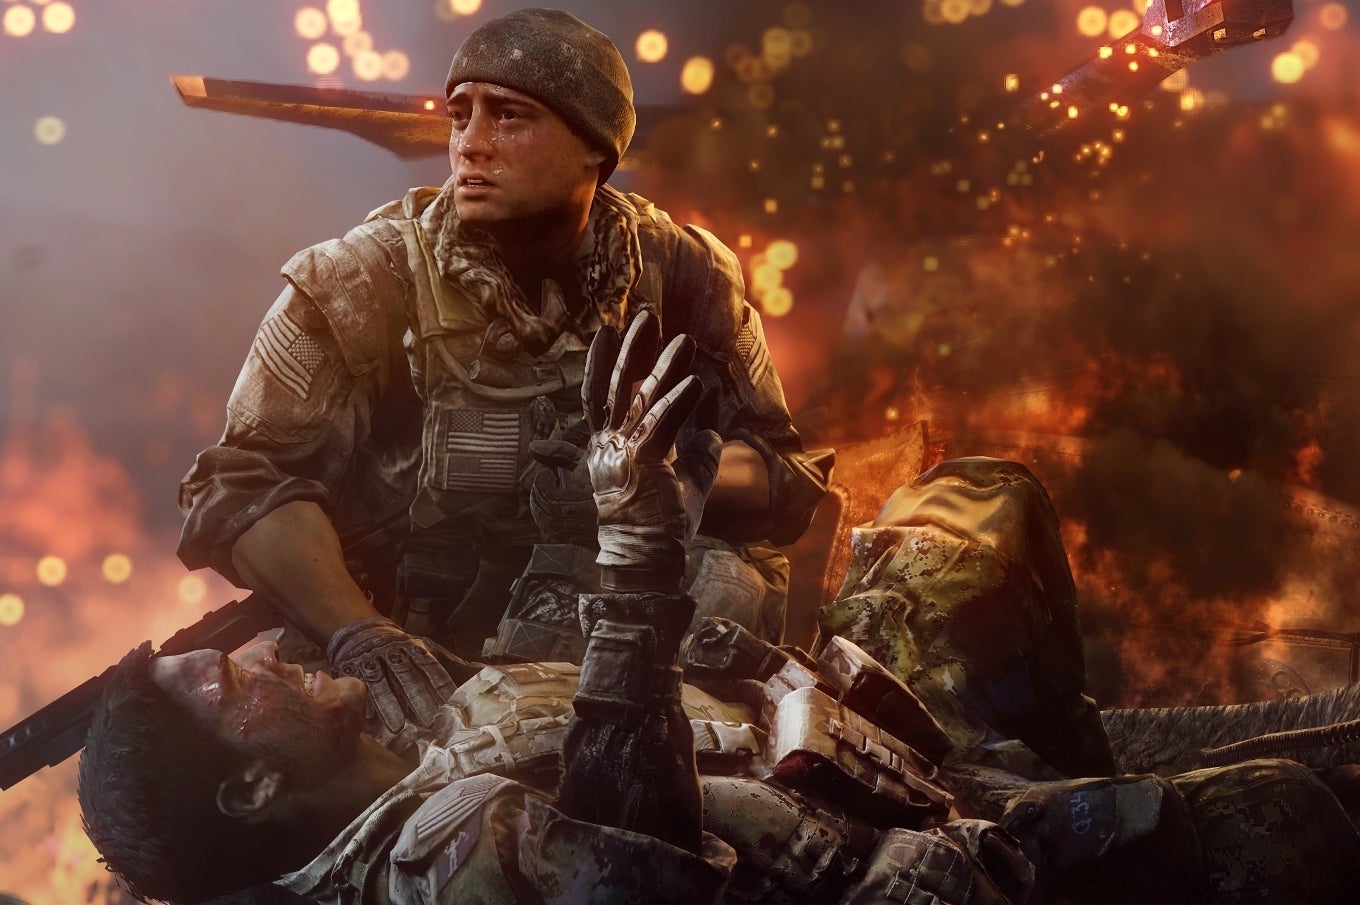 Image for Battlefield 4 officially revealed